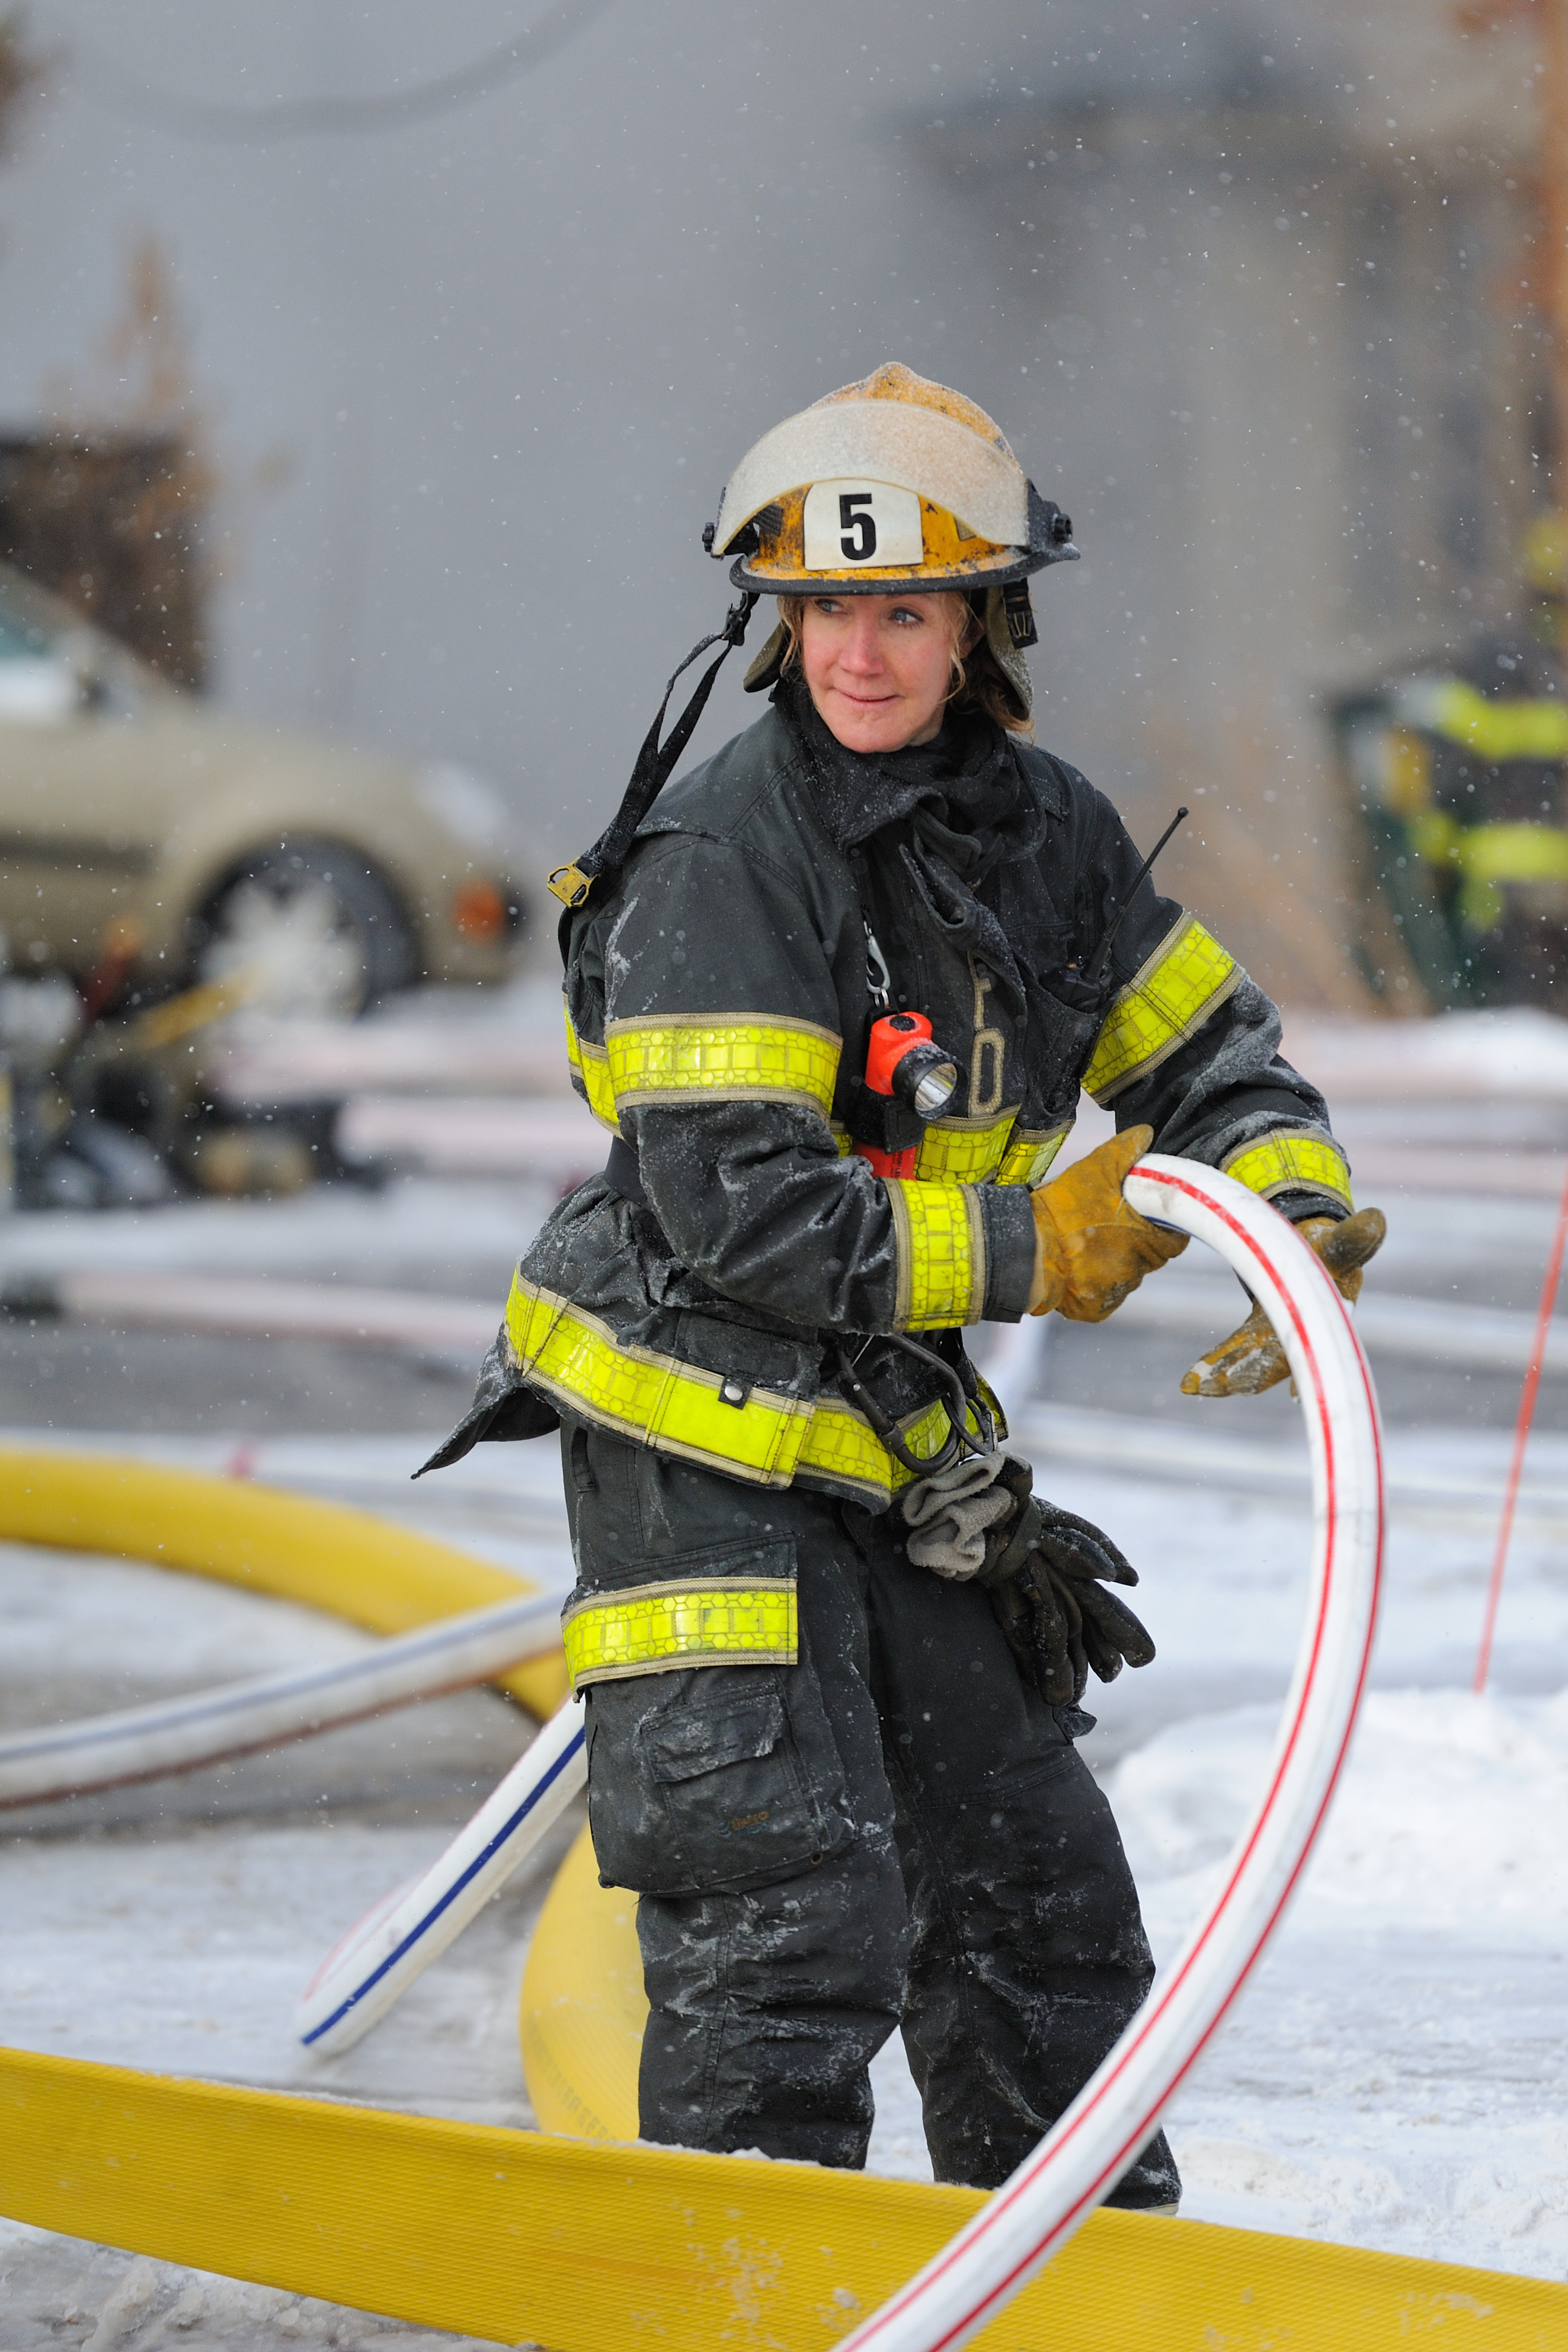 Woman firefighter with a fire hose